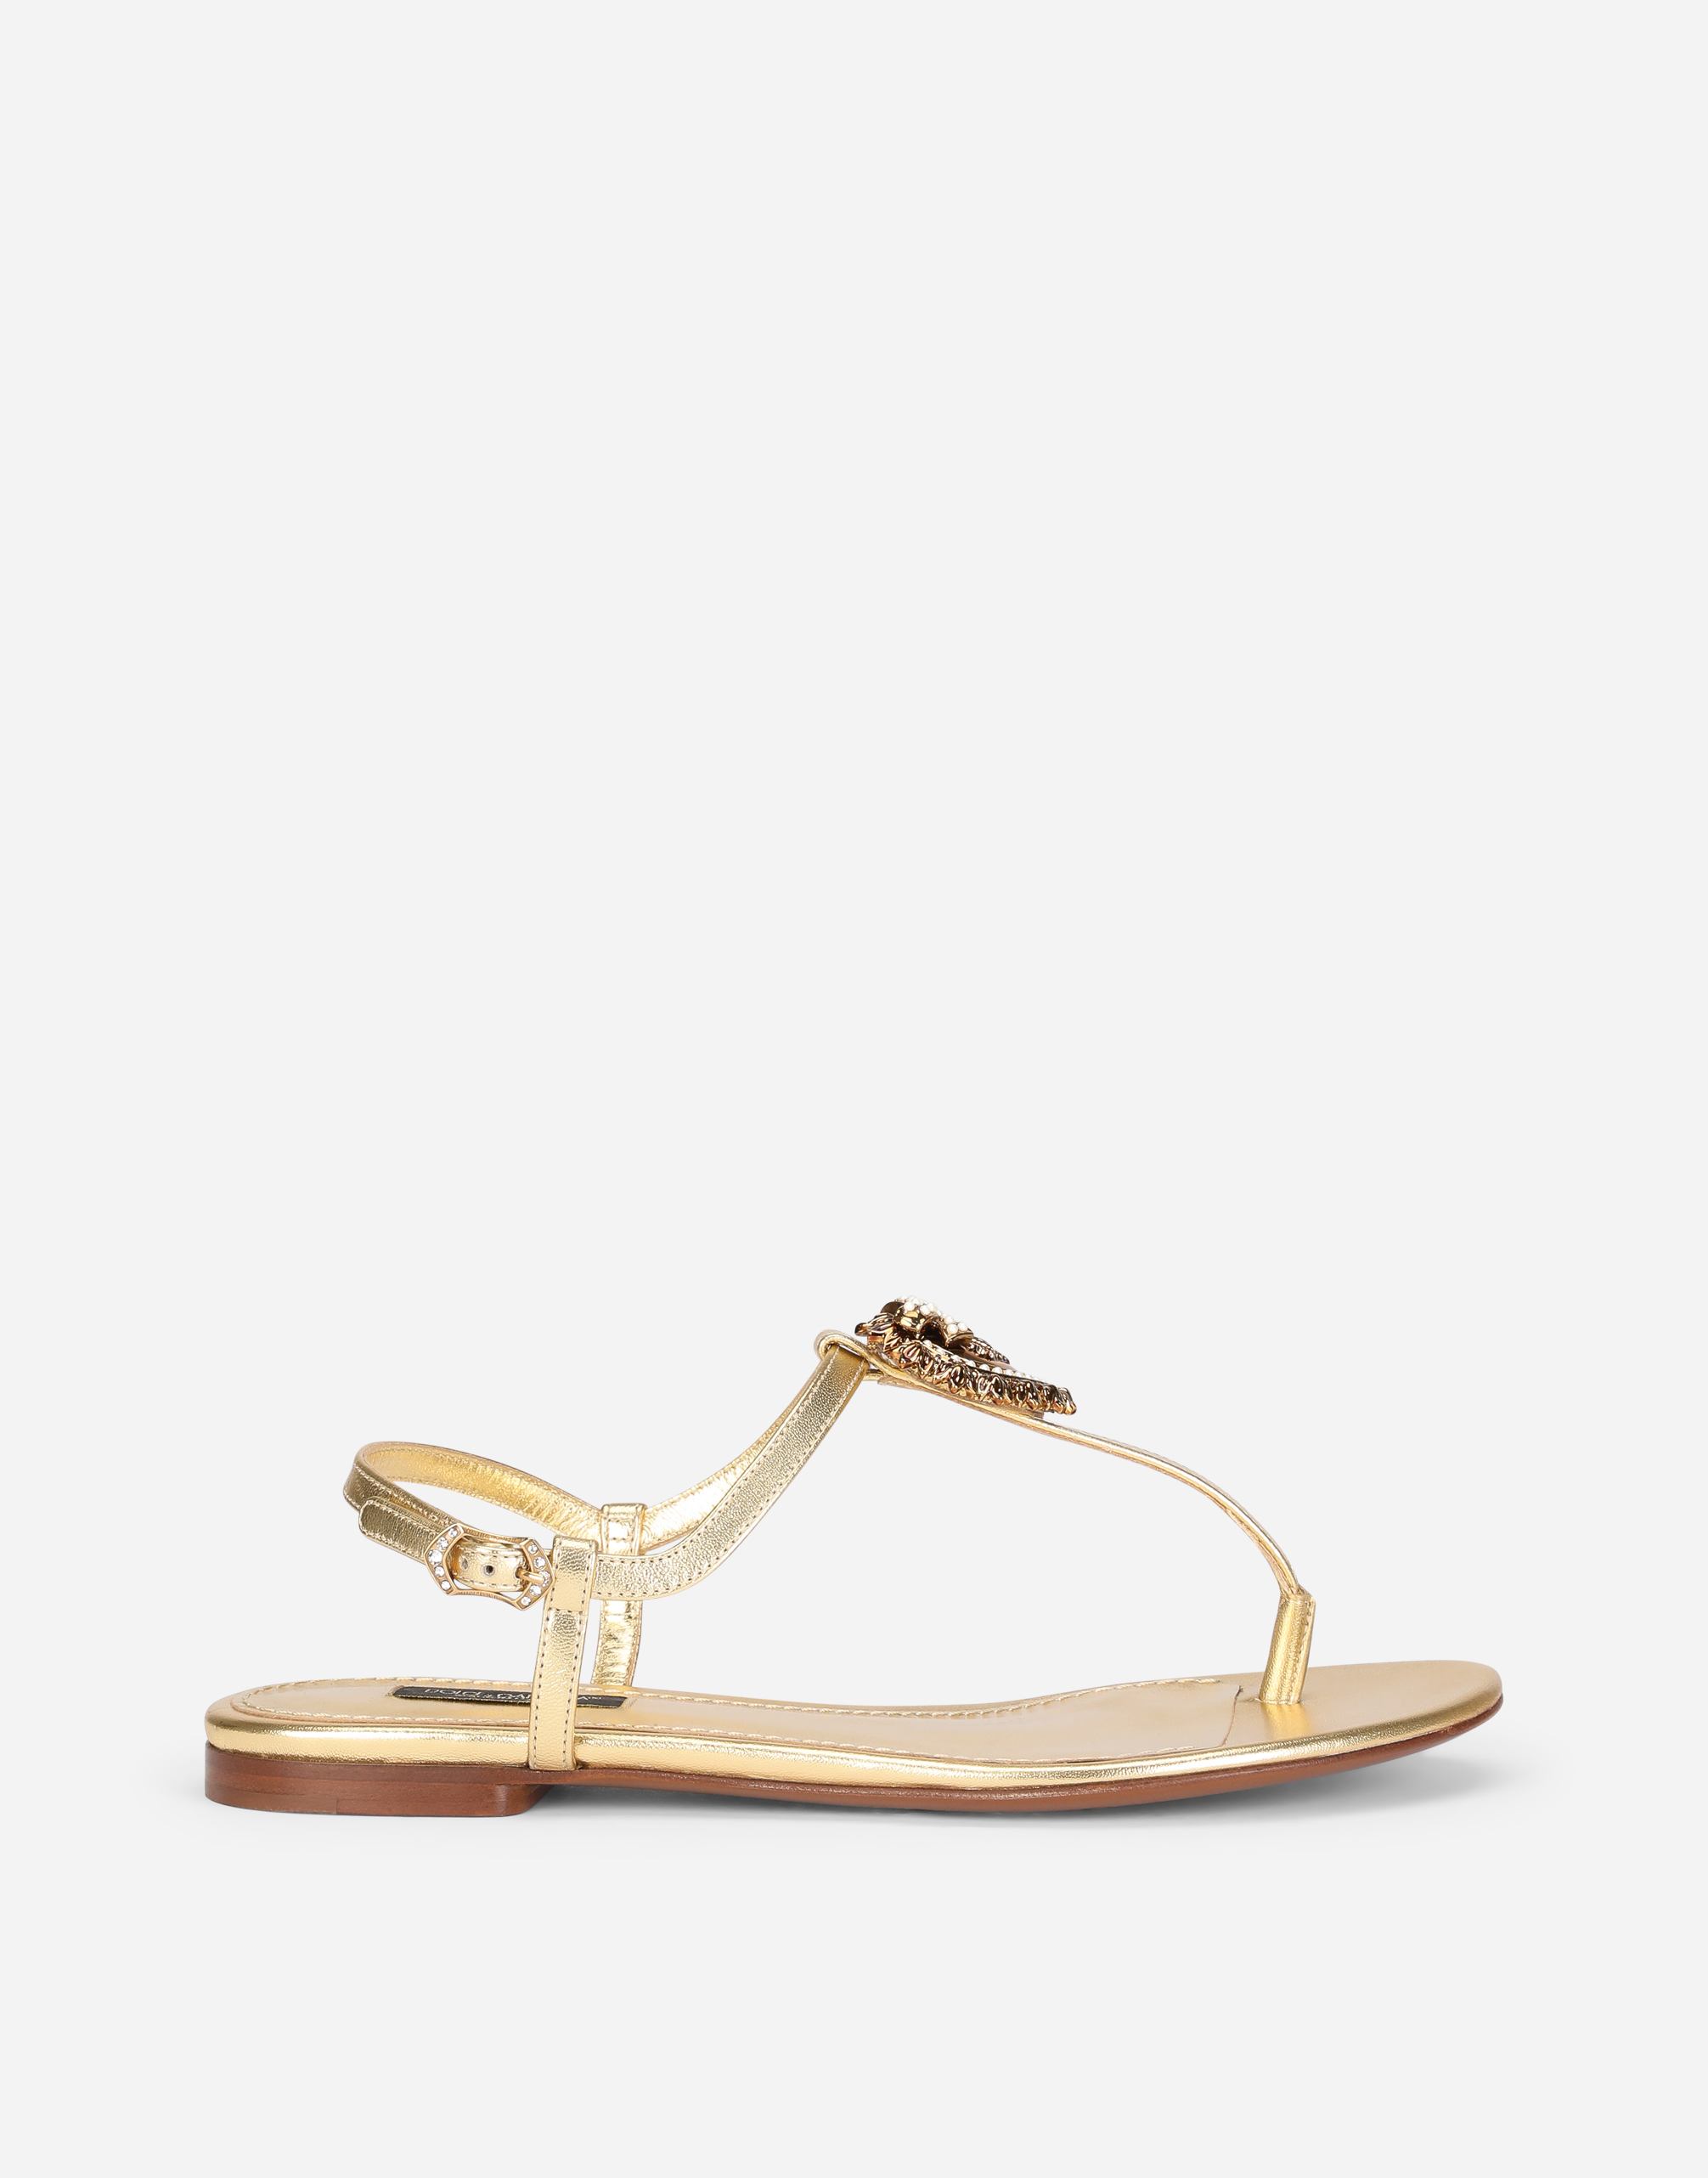 Nappa leather Devotion thong sandals in Gold